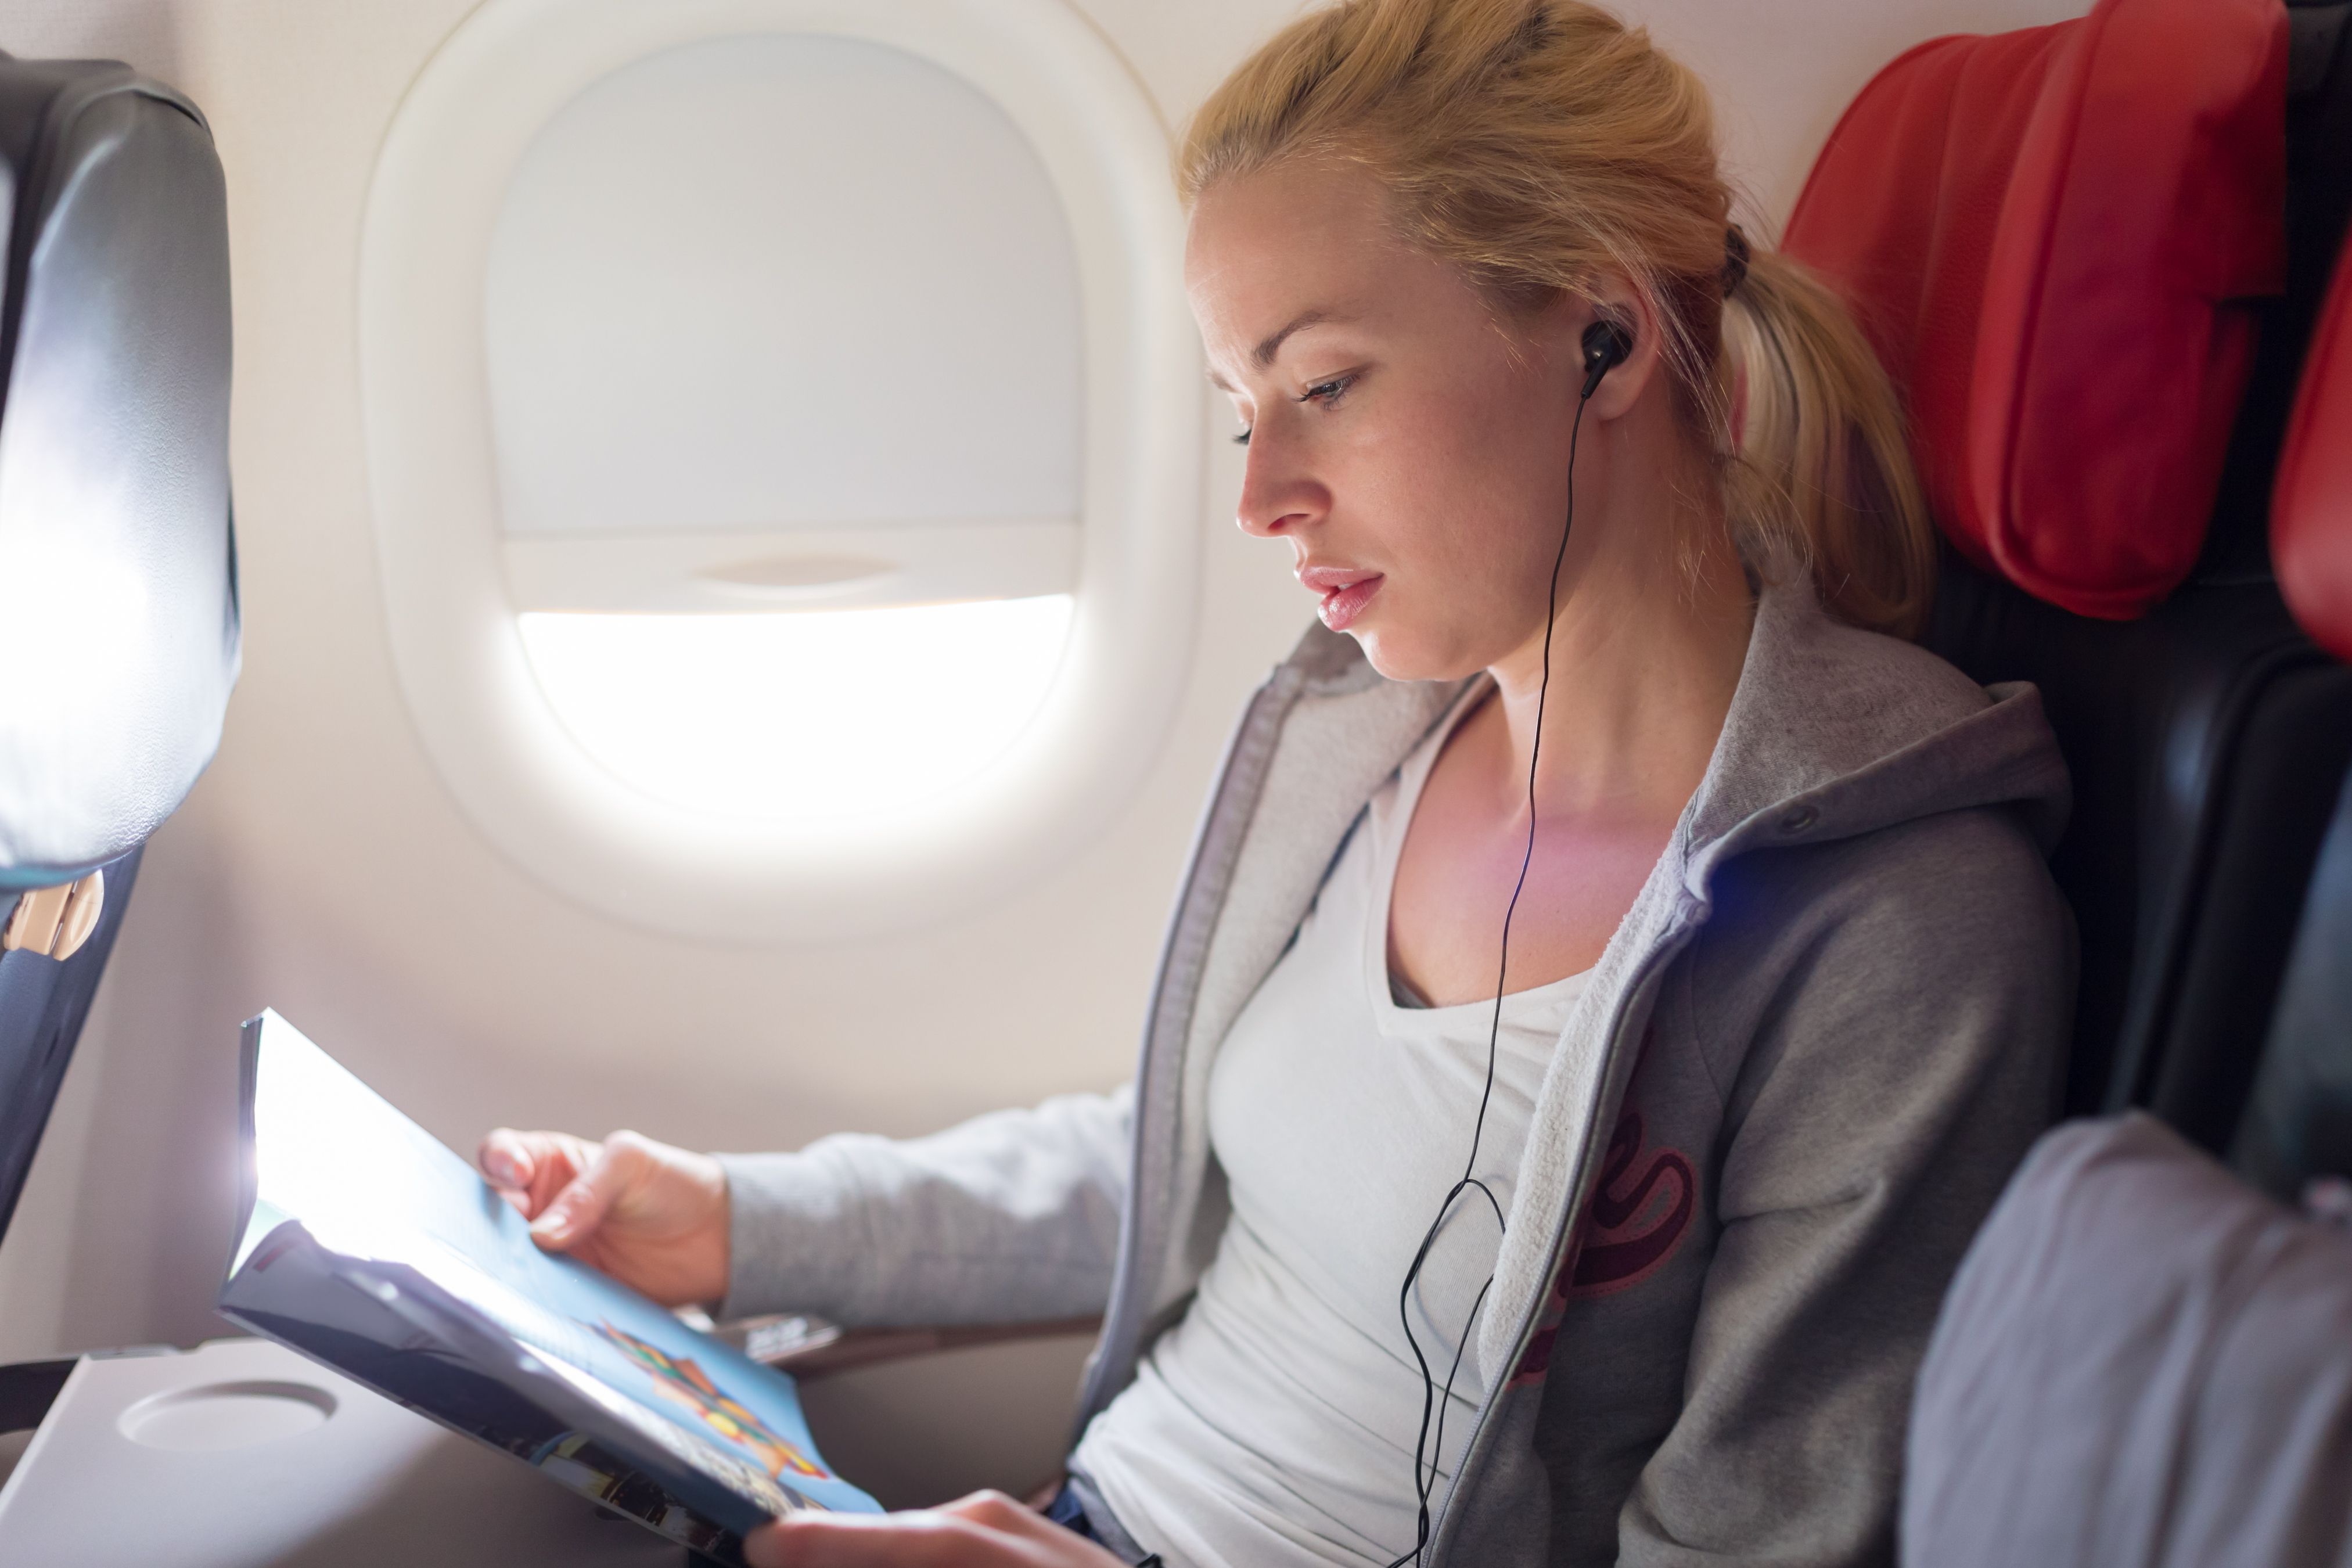 A young woman reading something during a flight | Source: Pexels